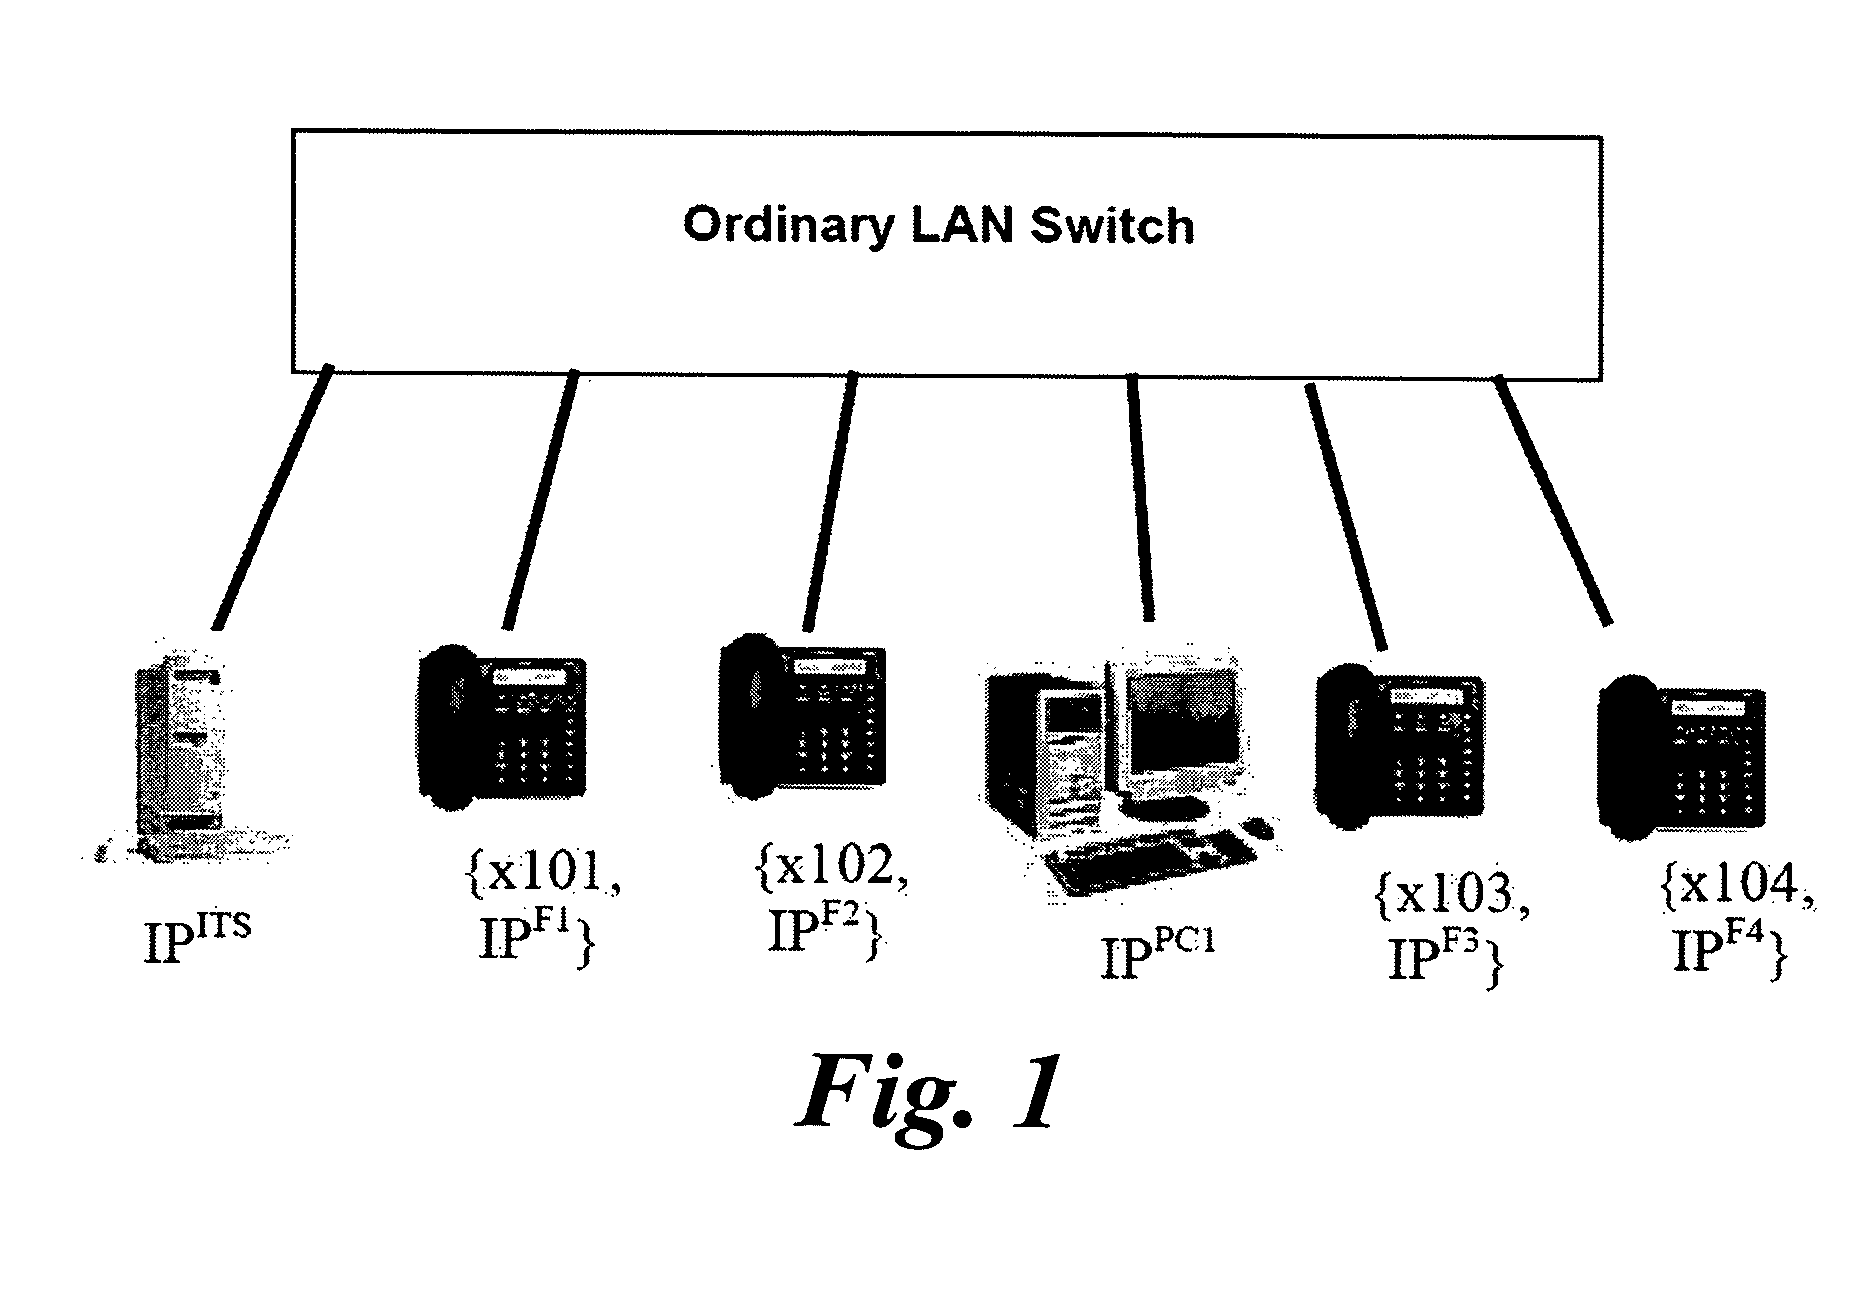 Security gatekeeper for a packetized voice communication network